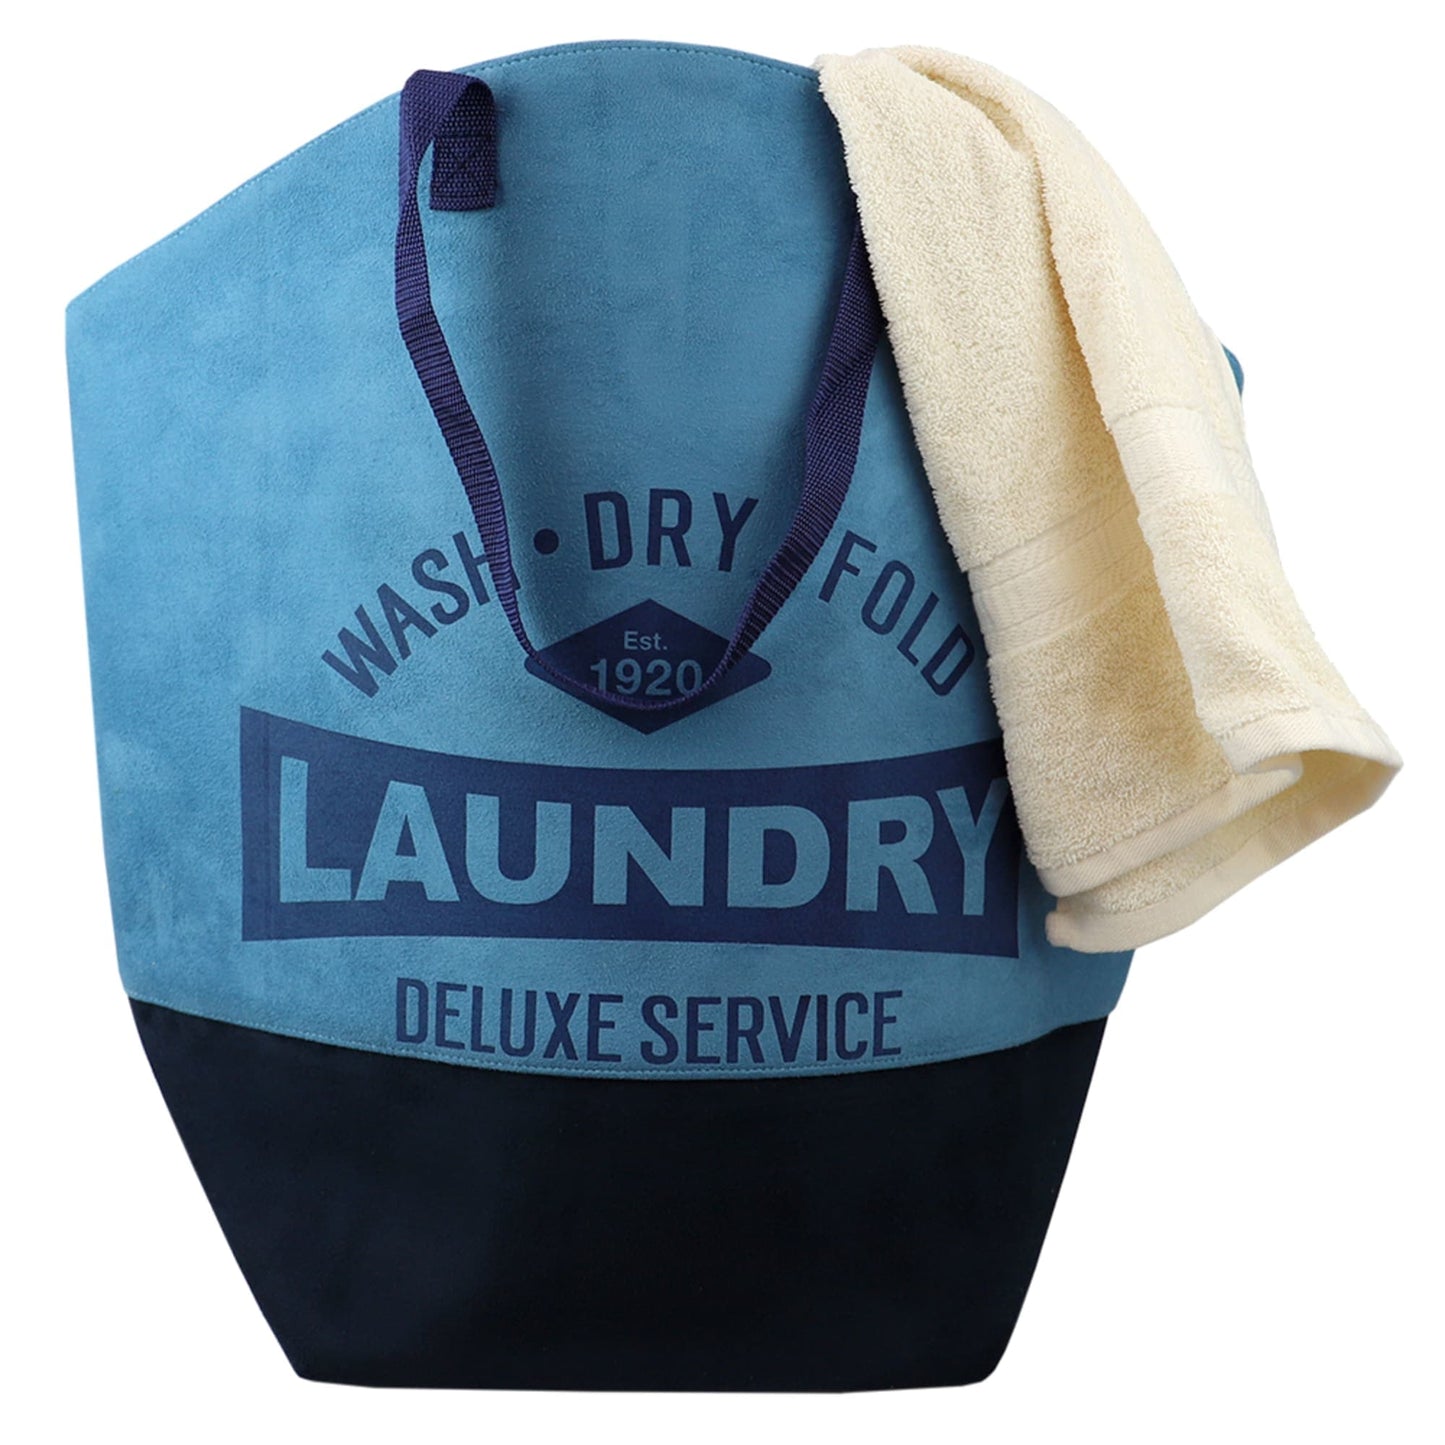 Deluxe Service Wash Dry Fold Canvas Laundry Tote, Blue